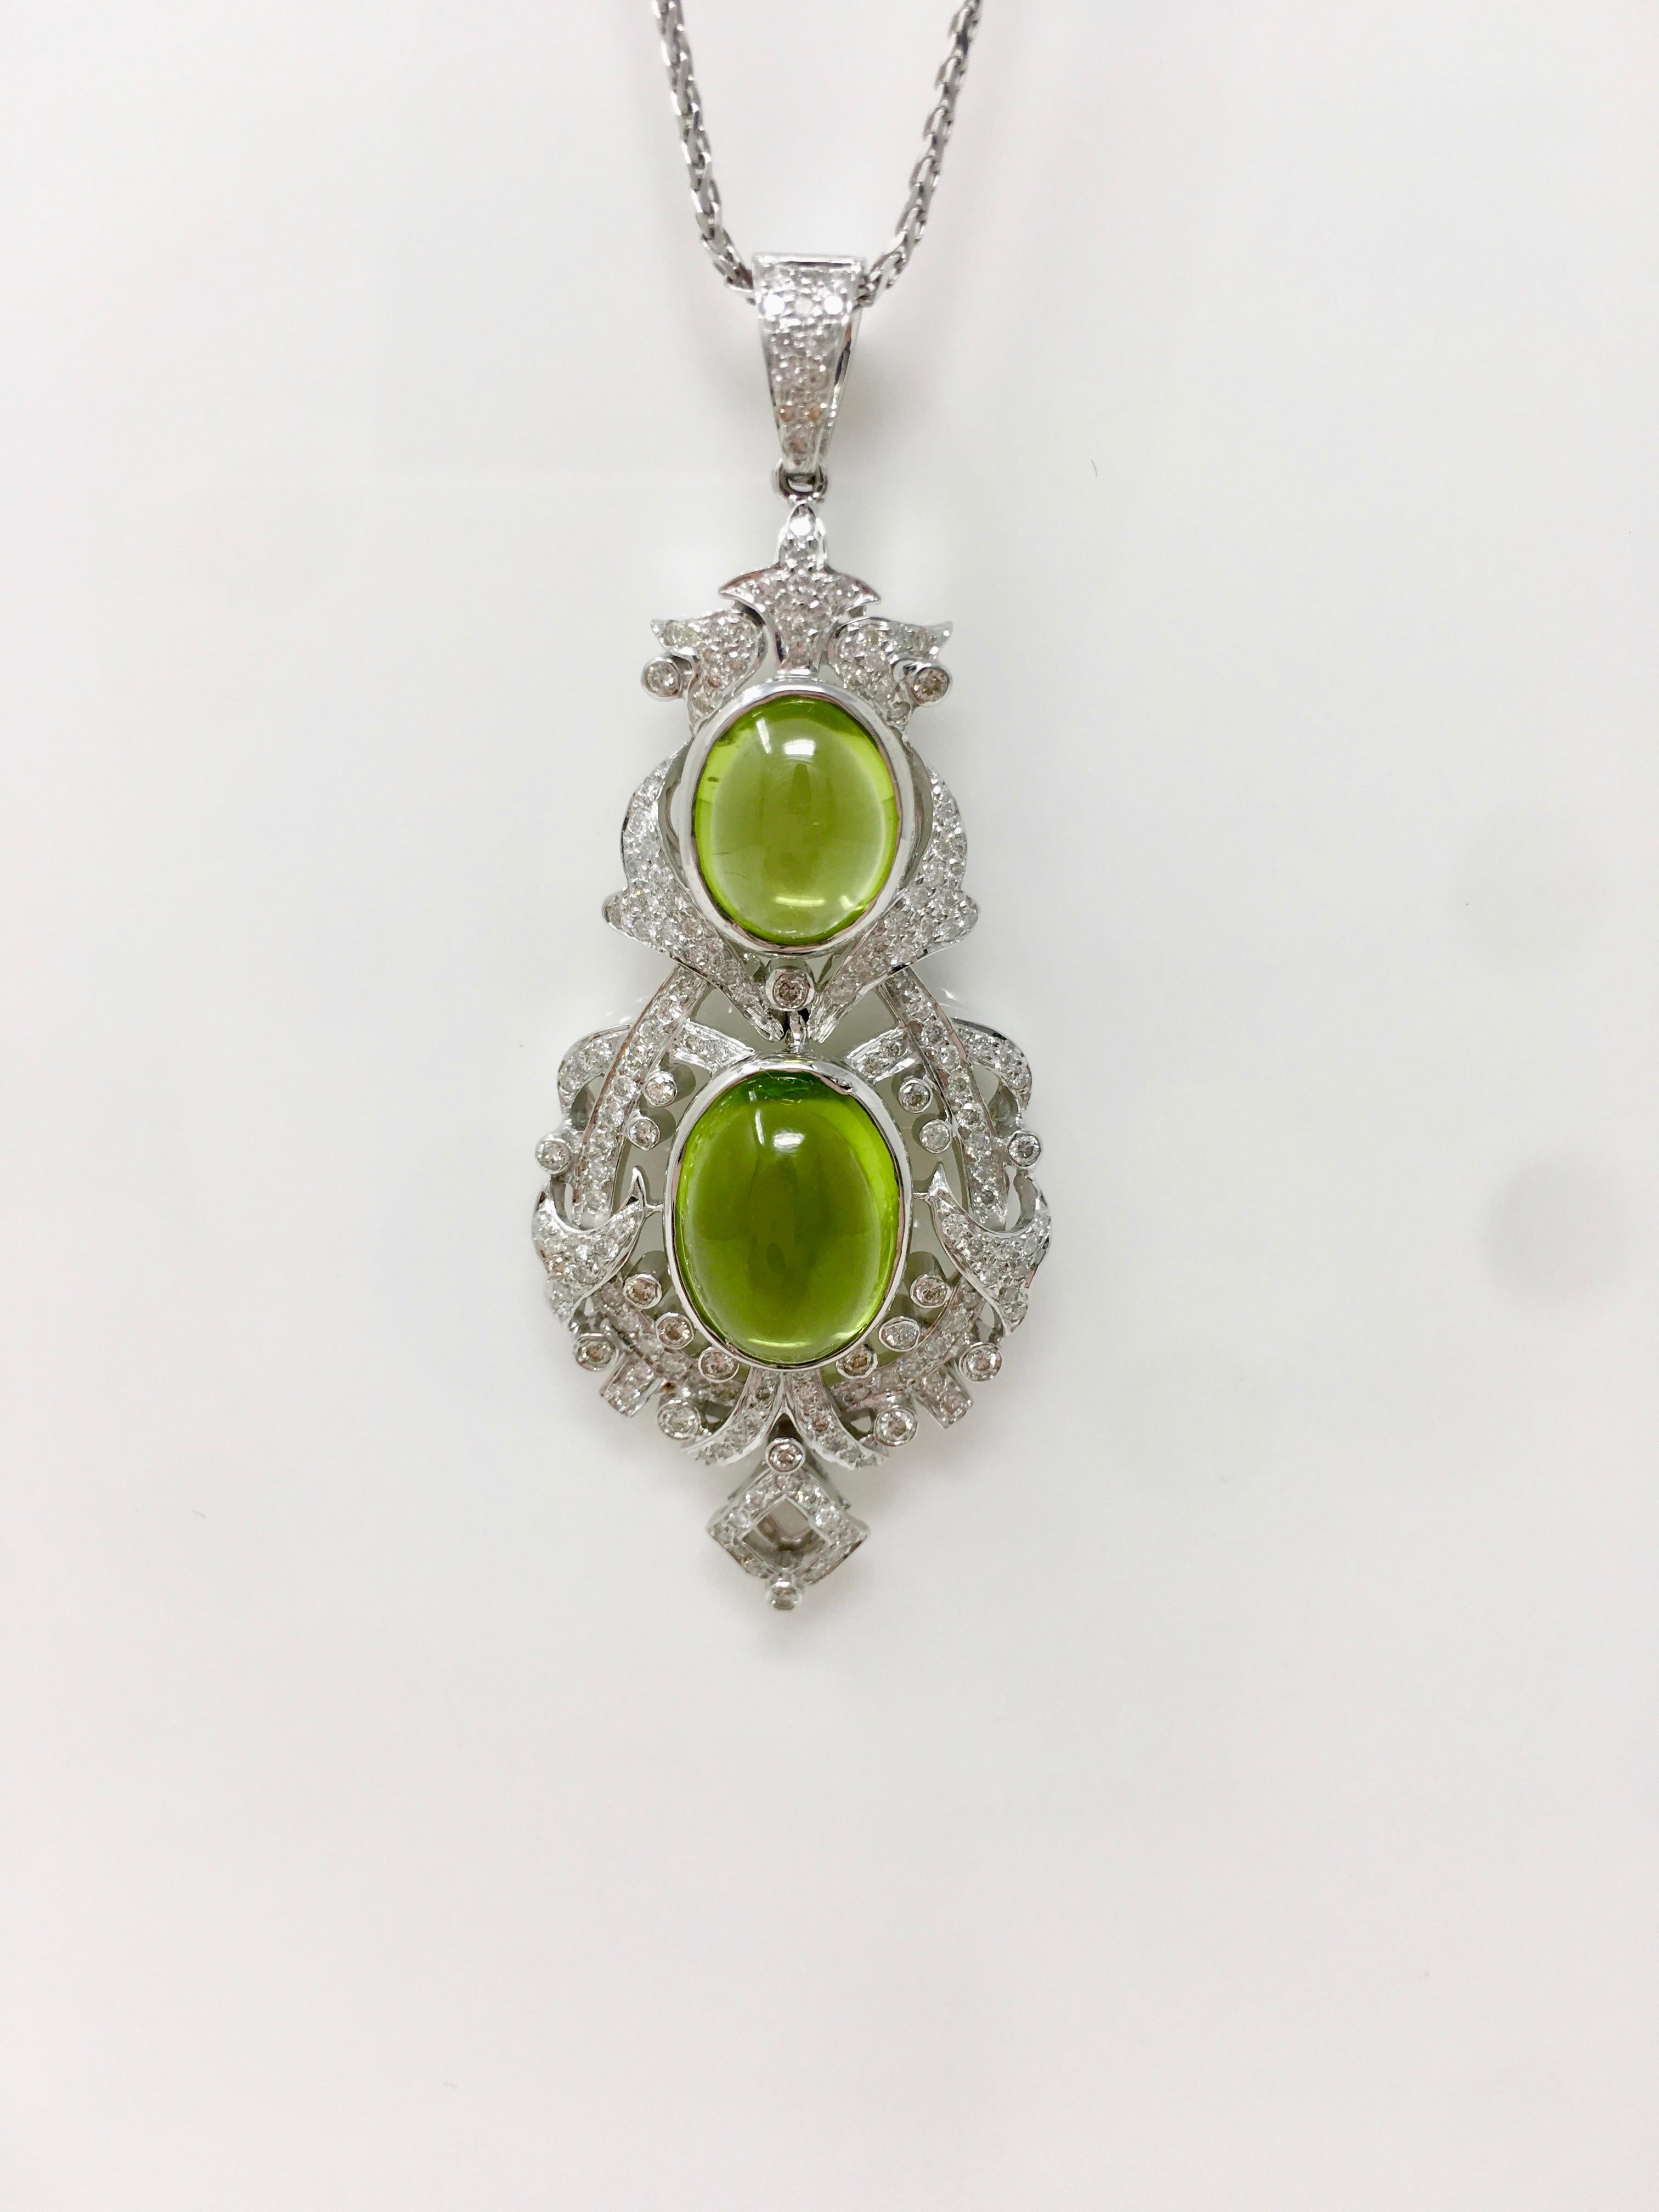 This beautiful custom handmade creation by Moguldiam Inc features a pair of earrings and a pendant. The diamond weight is 2.52 carat with VS clarity and GH color and peridot weight is 17.34 carat. The gold weighs 31.900 grams. The measurements on